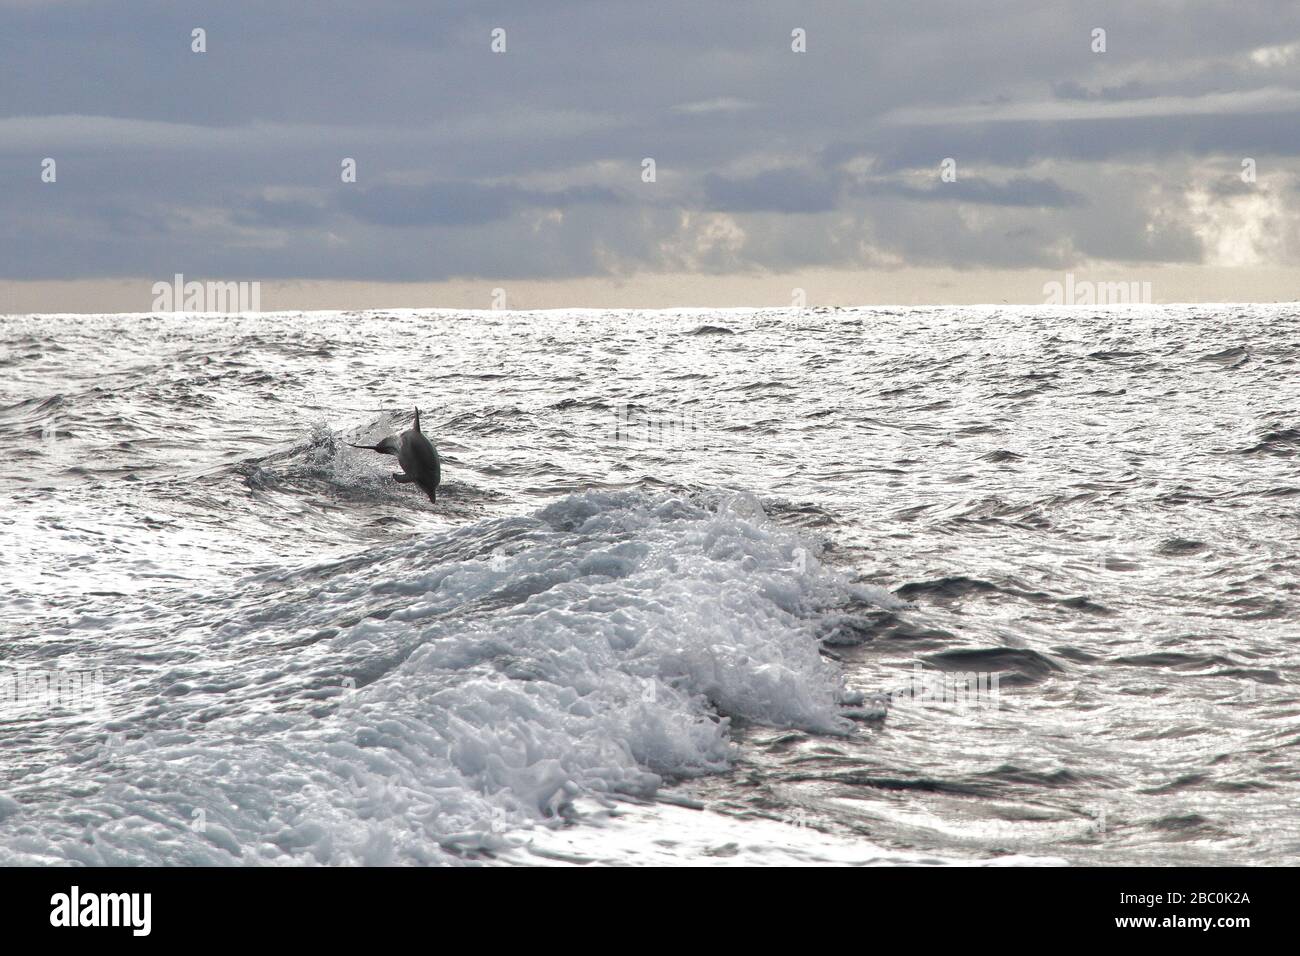 An Atlantic Spotted Dolphin (Stenella frontalis) jumping out of the water at the coast of Pico Island on the Azores, Portugal. Stock Photo